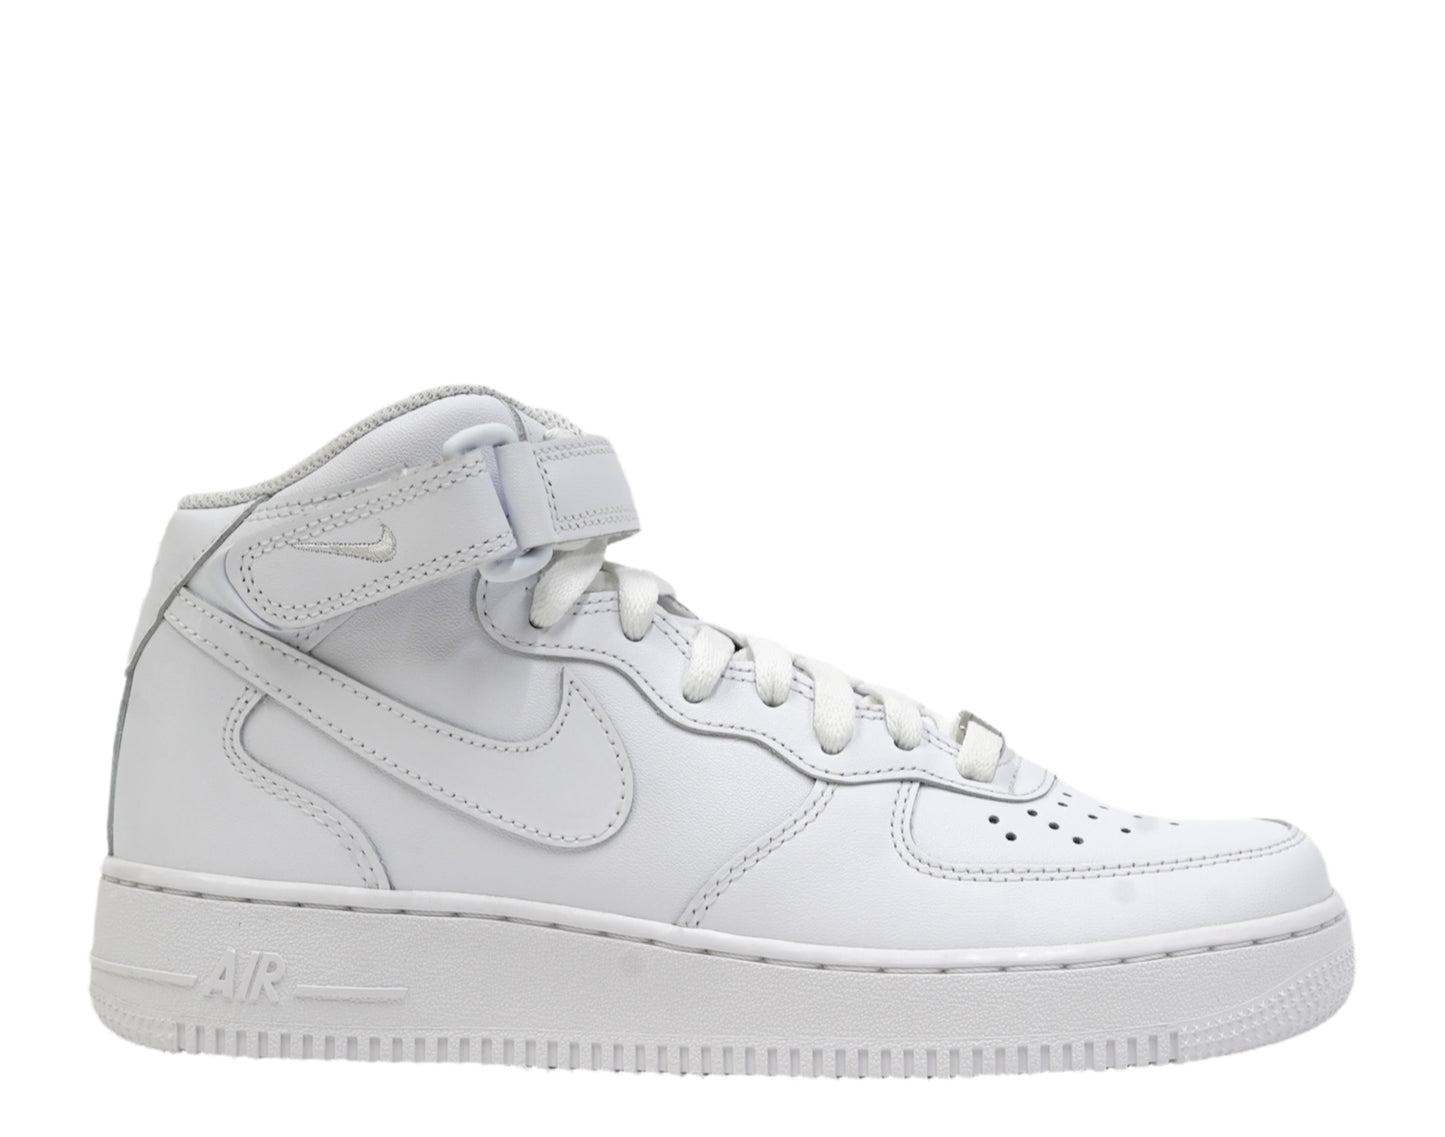 Nike Air Force 1 Mid '07 Men's Basketball Shoes